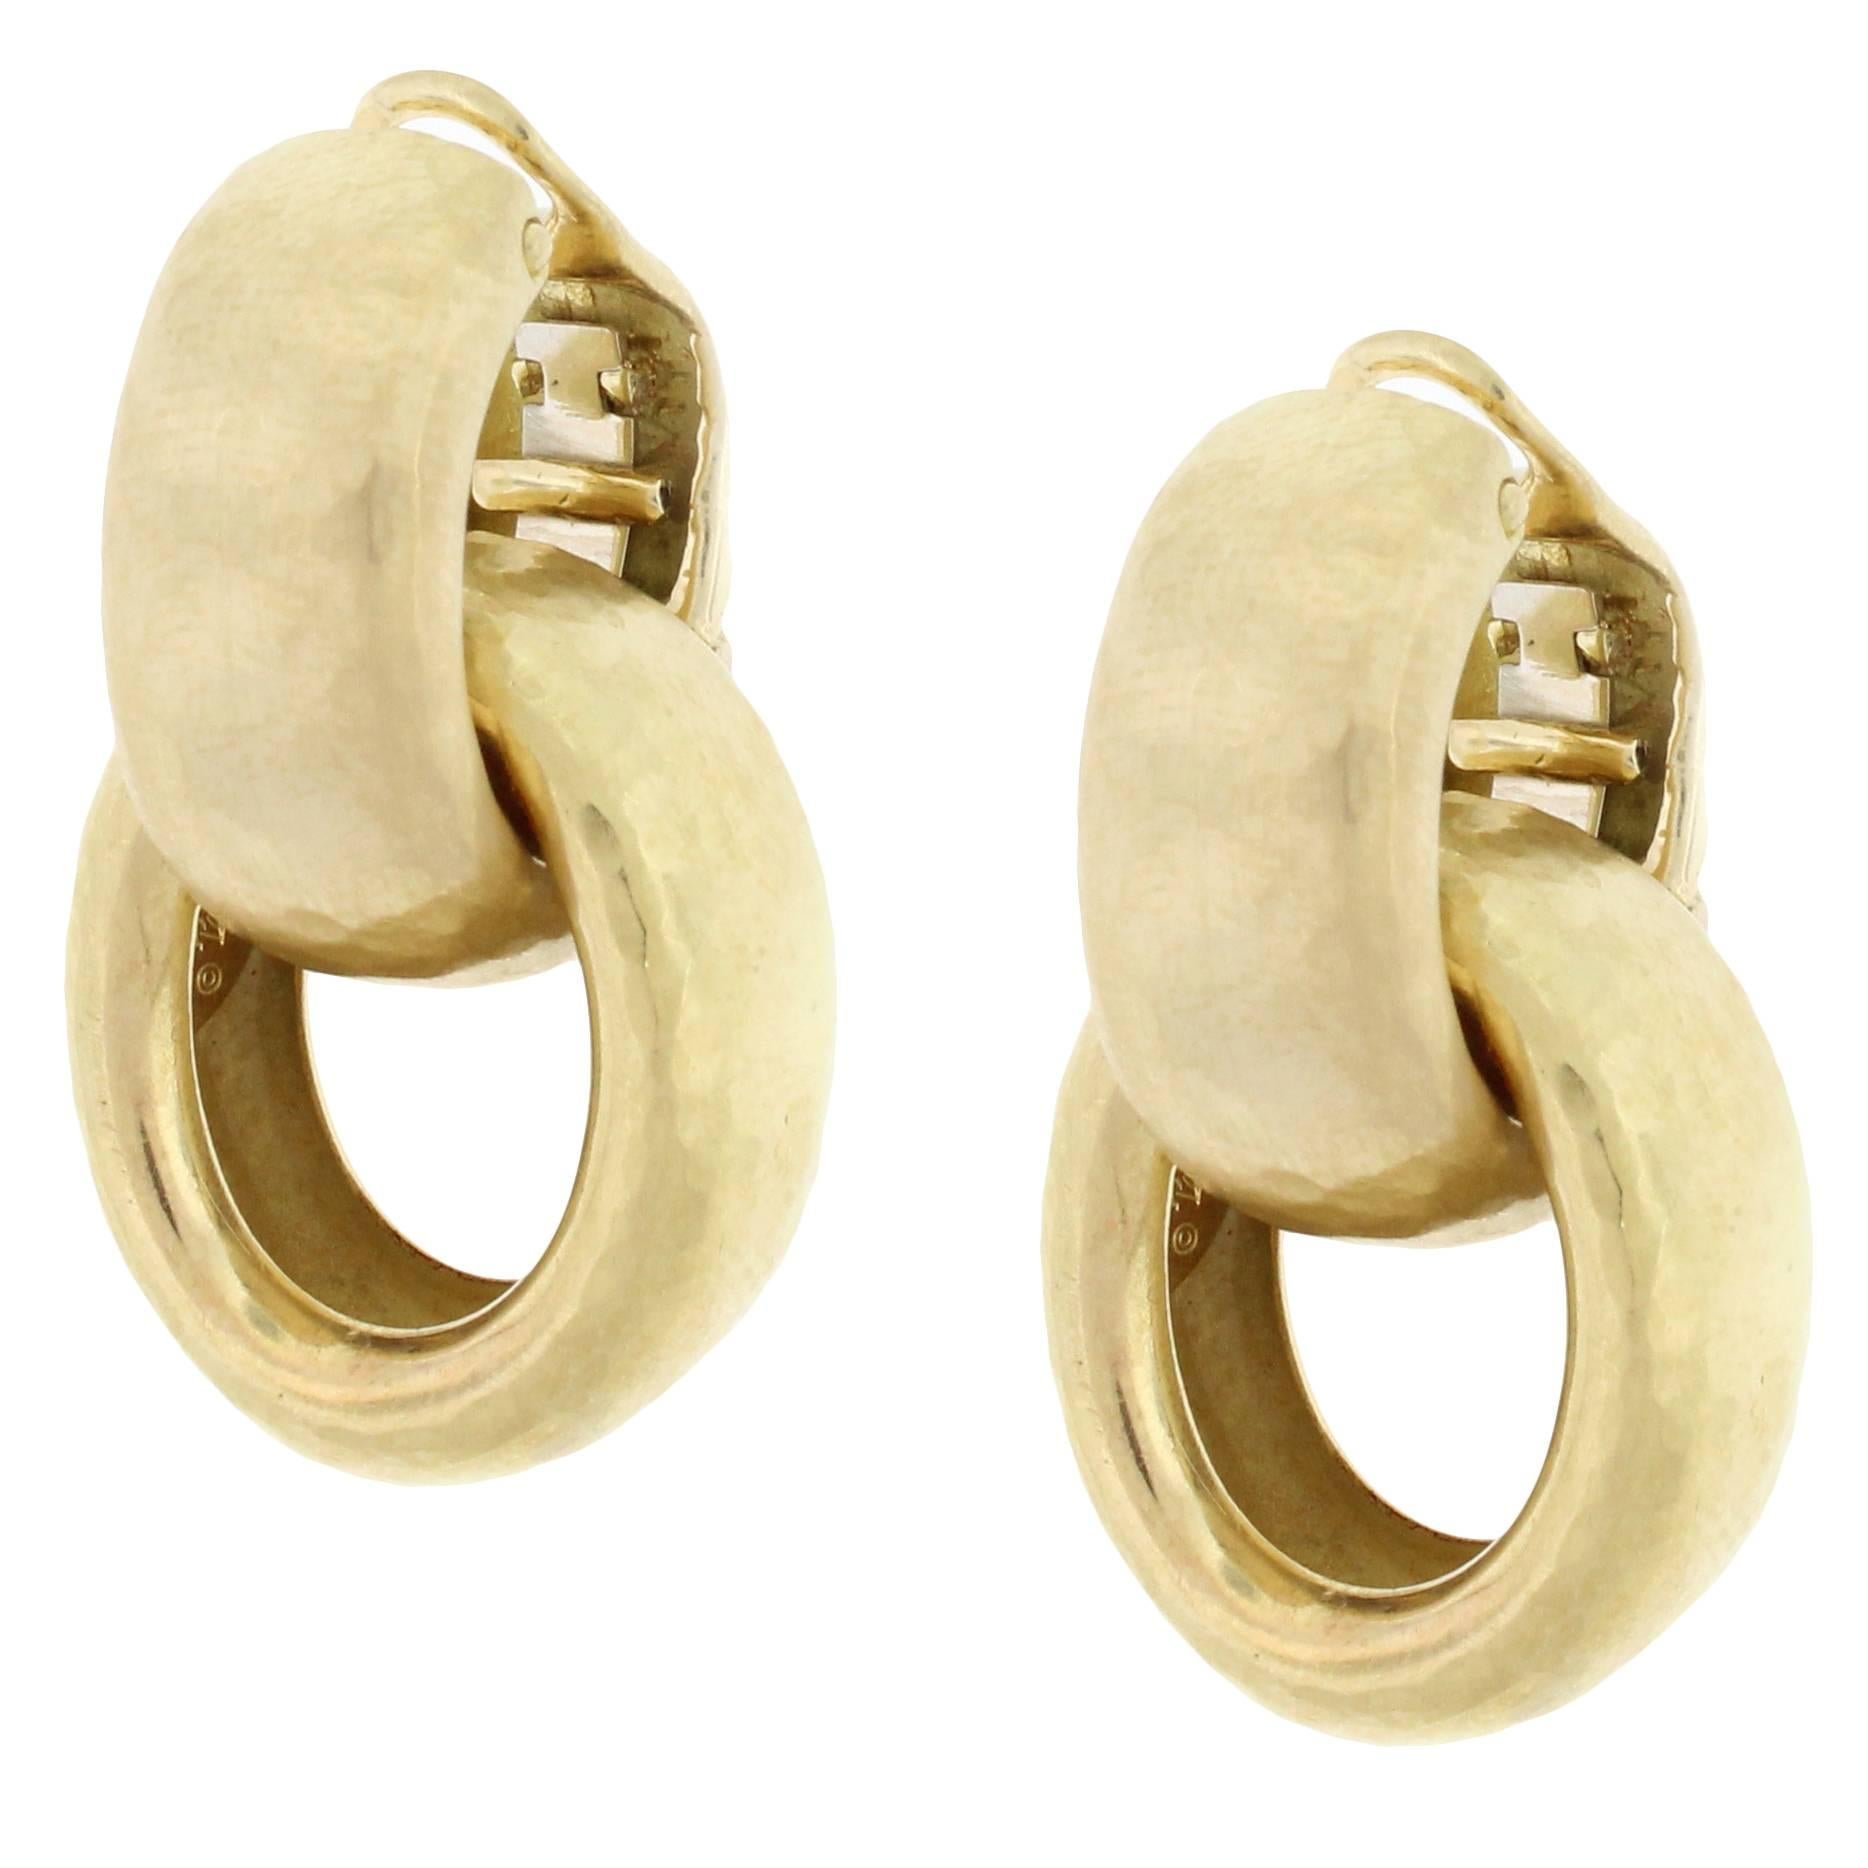  Tiffany & Co. Paloma Picasso Hammered Double Hoop Earrings  